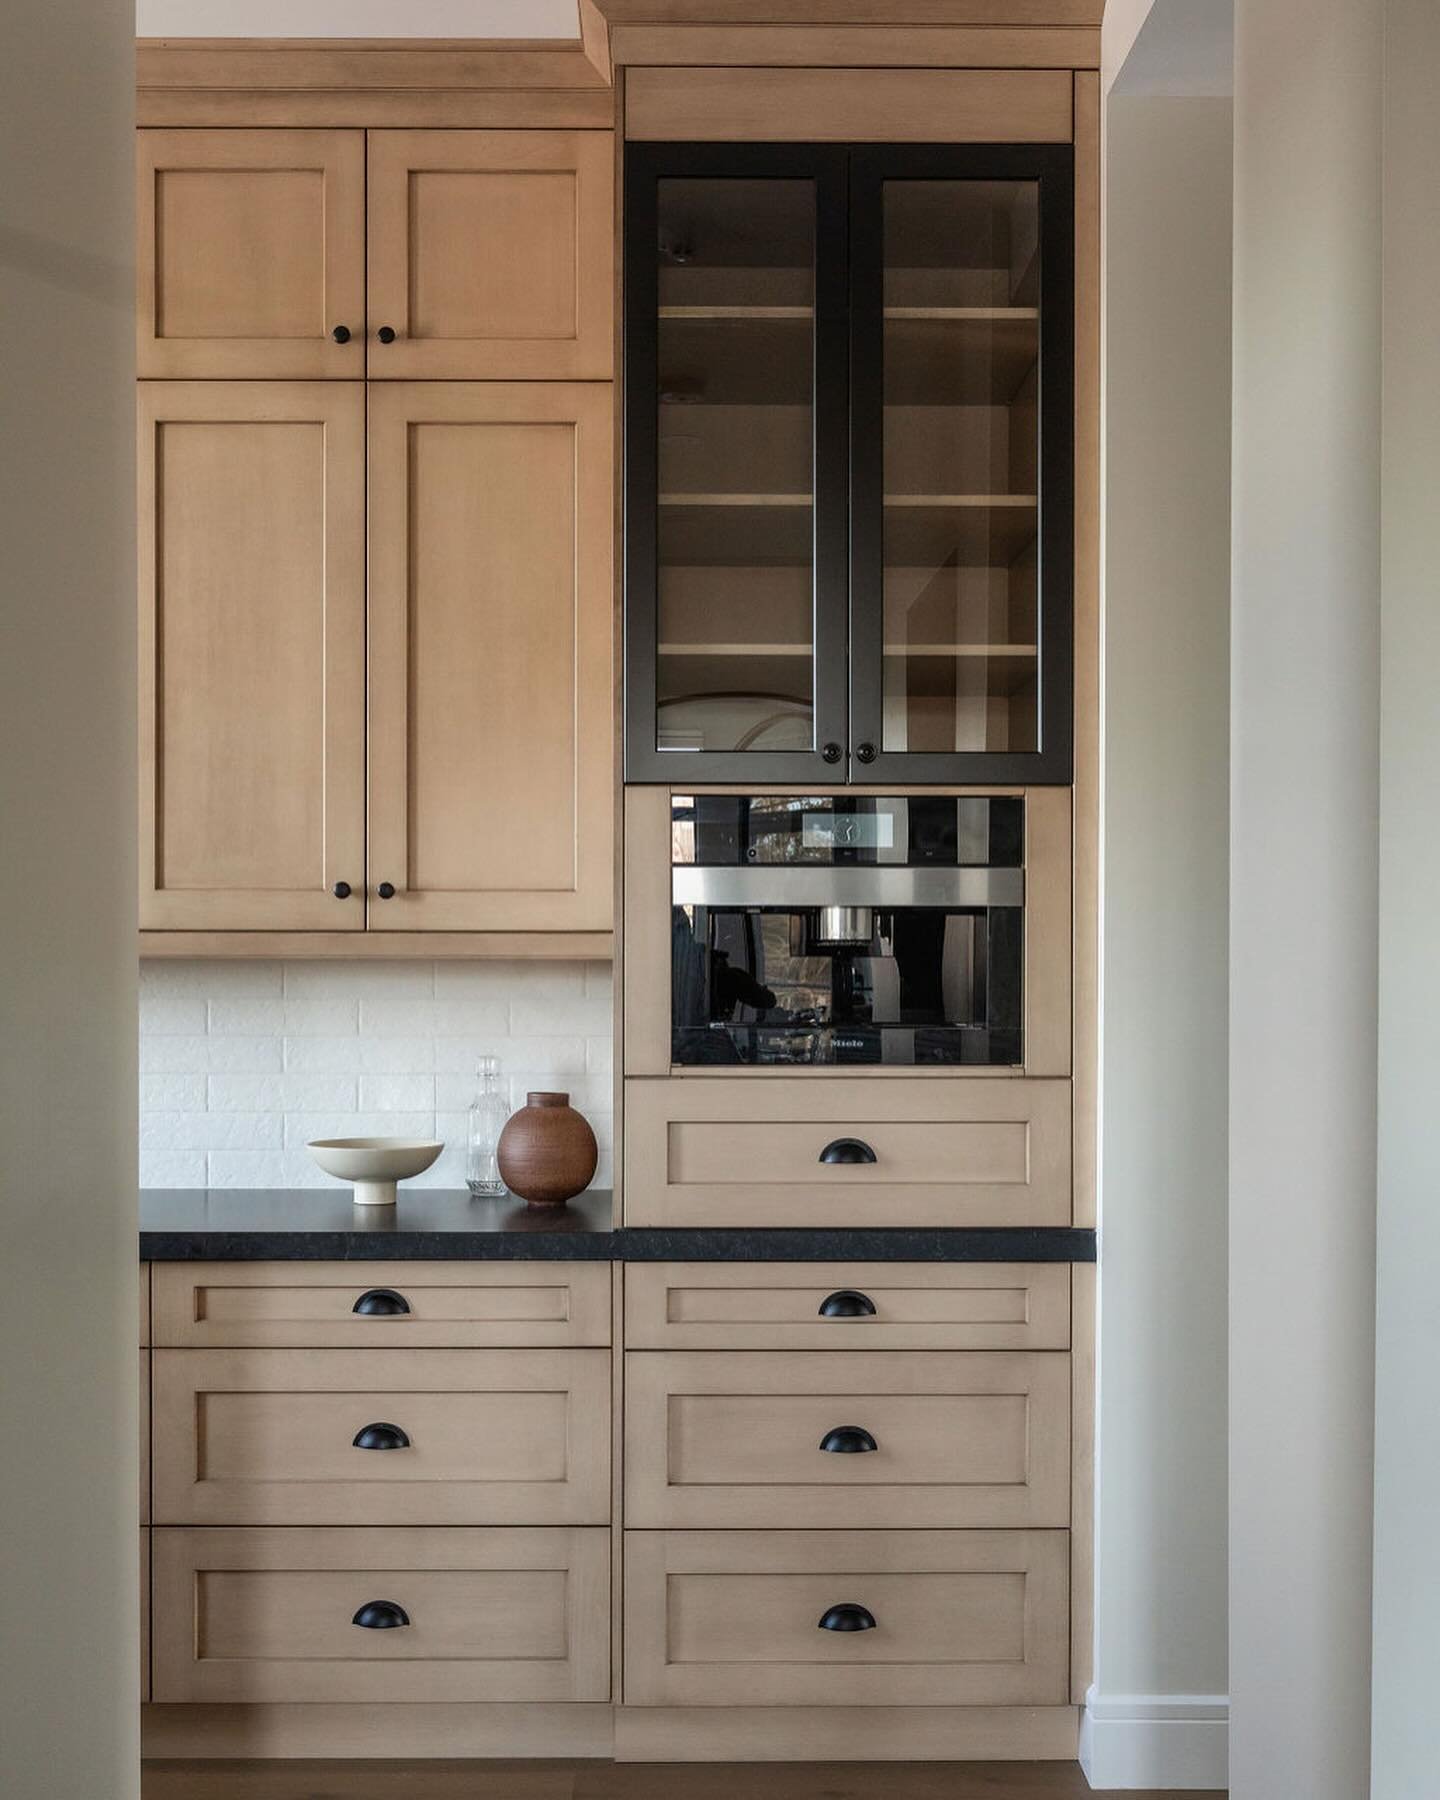 One of those days when I wish I didn&rsquo;t go off caffeine&hellip;how amazing would a built-in coffee maker be in the pantry off your kitchen?!

Project: #MED_strathcona

Builder: @omnia.construction 
Photography: @sharon_litchfield